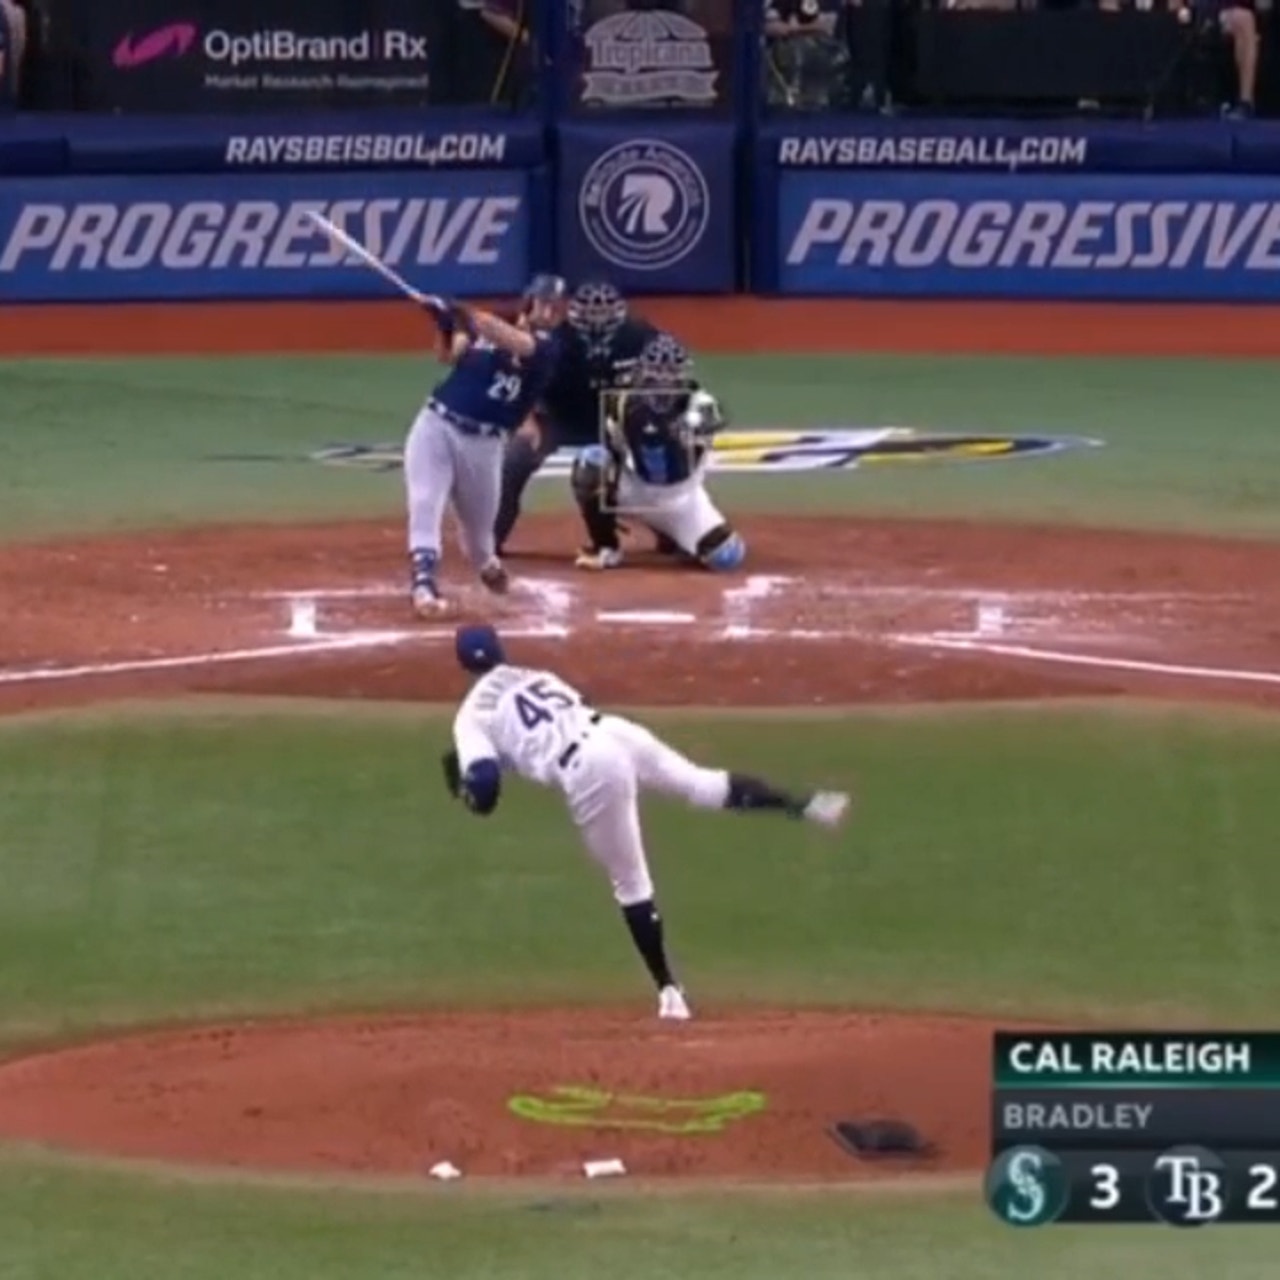 Cal Raleigh blasts a solo home run to extend the Mariners' lead against the  Rays